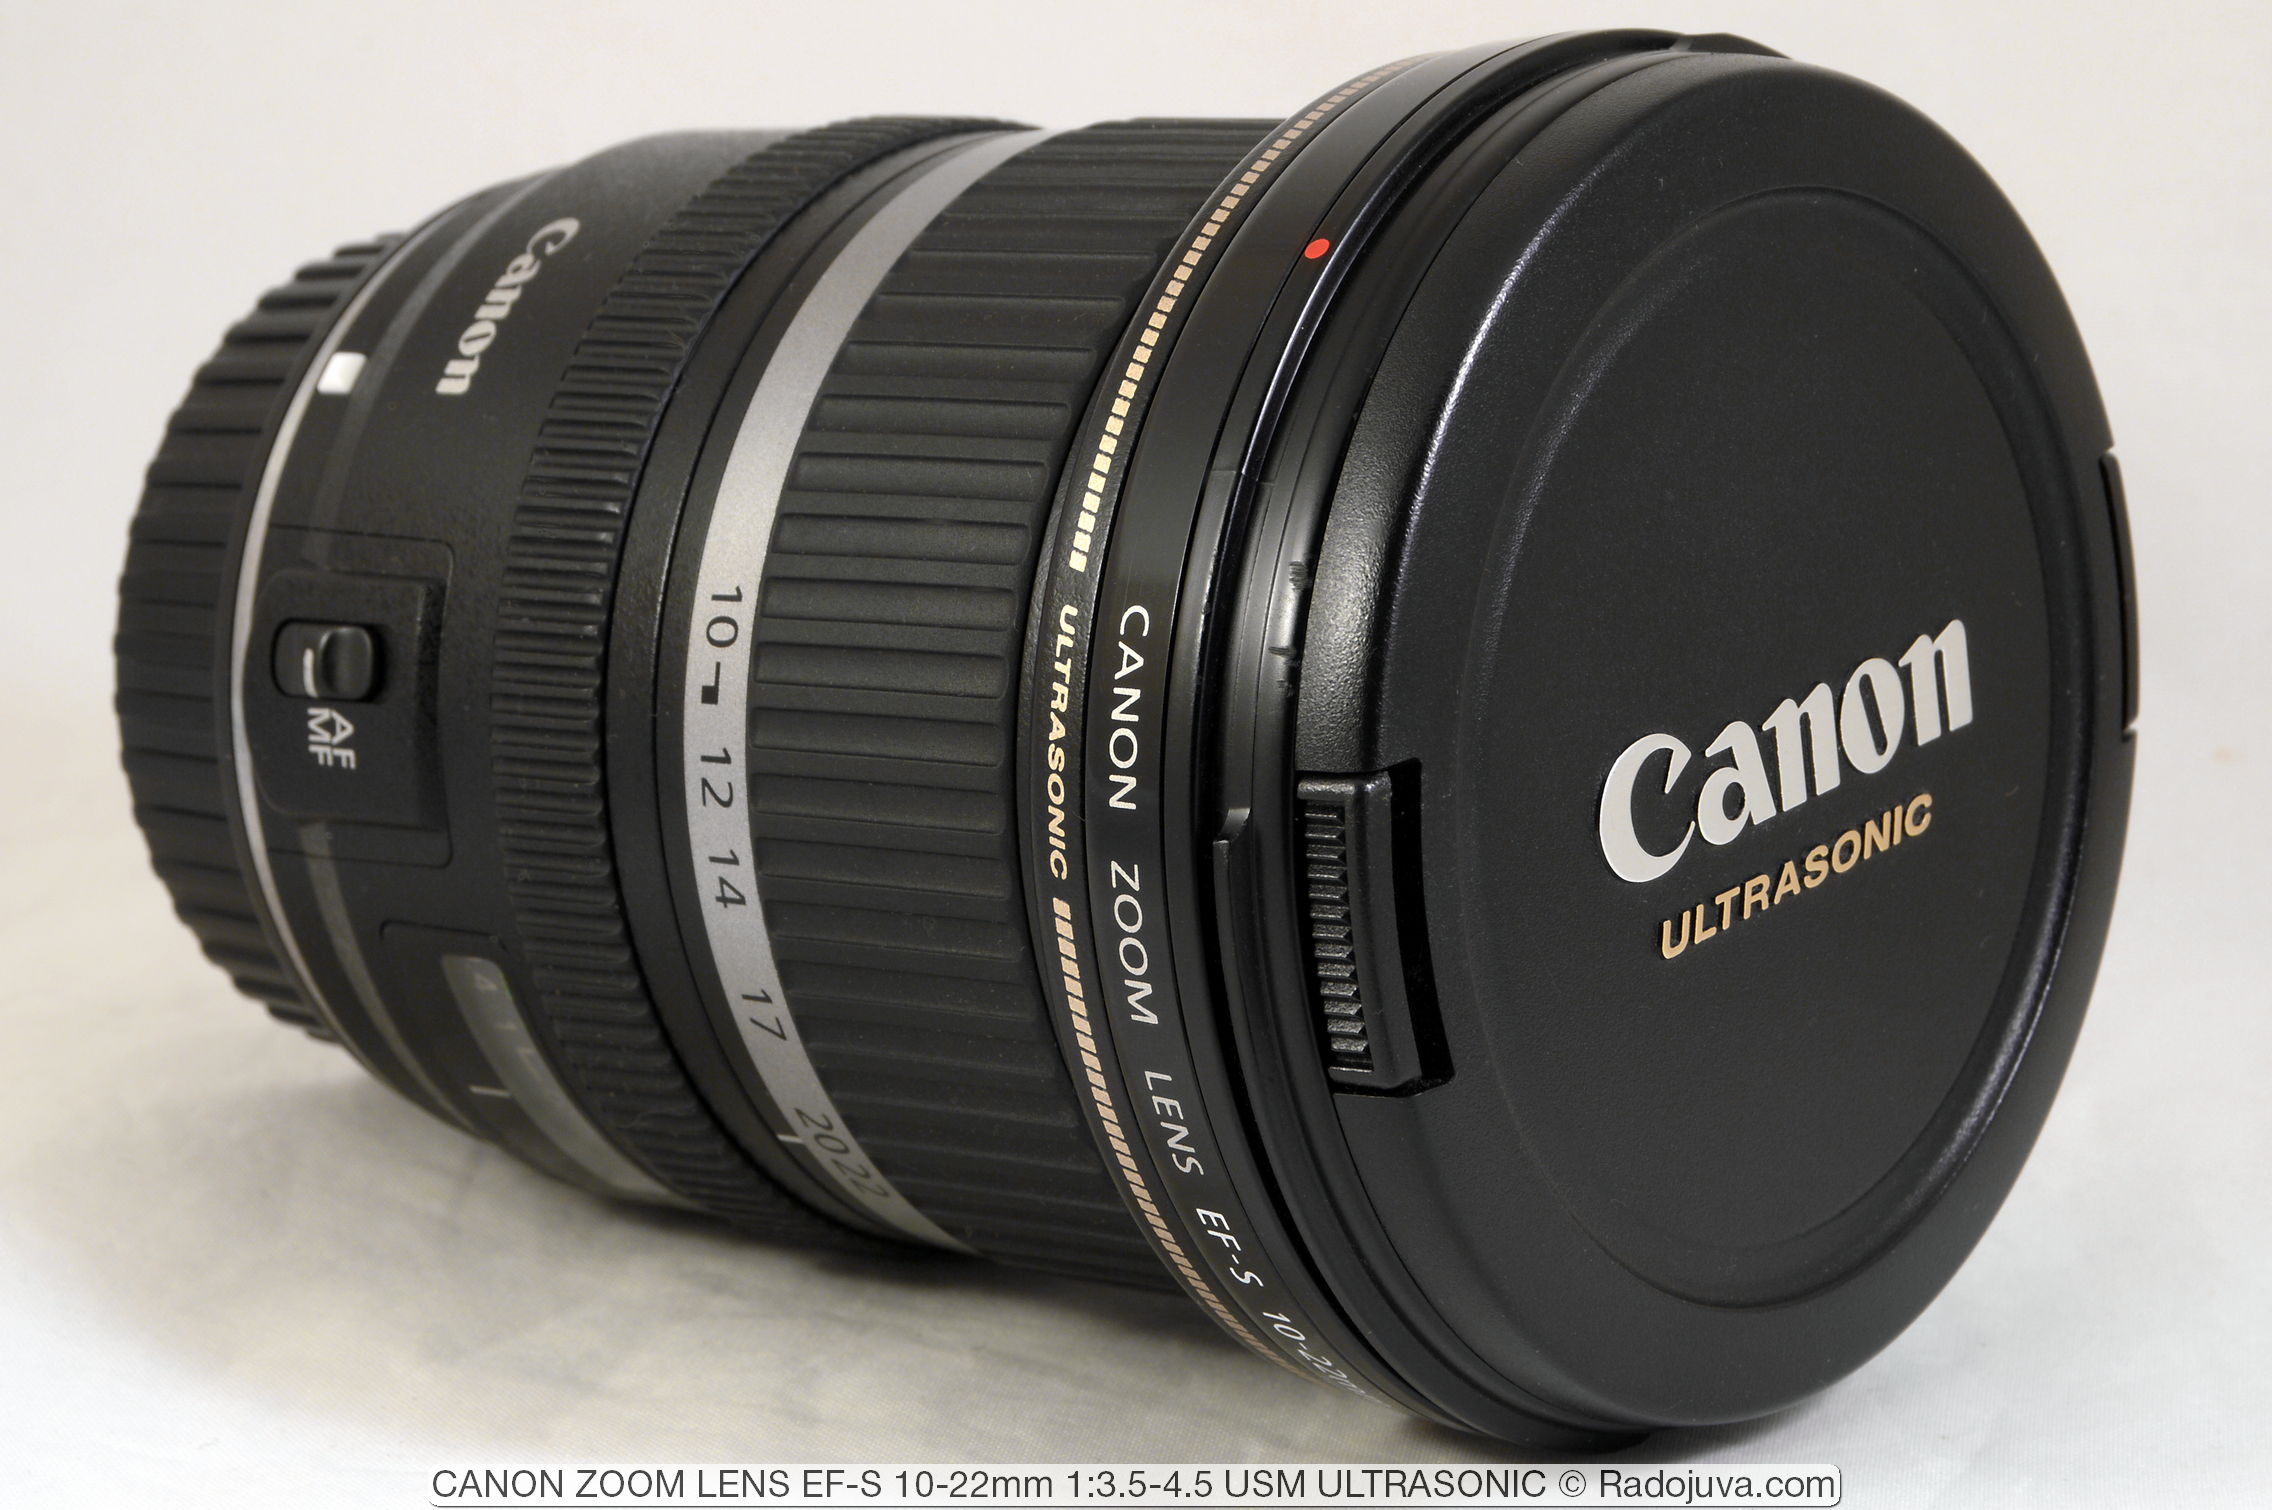 Canon Zoom Lens EF-S 10-22mm 1: 3.5-4.5 USM ULTRASONIC Review | Happy